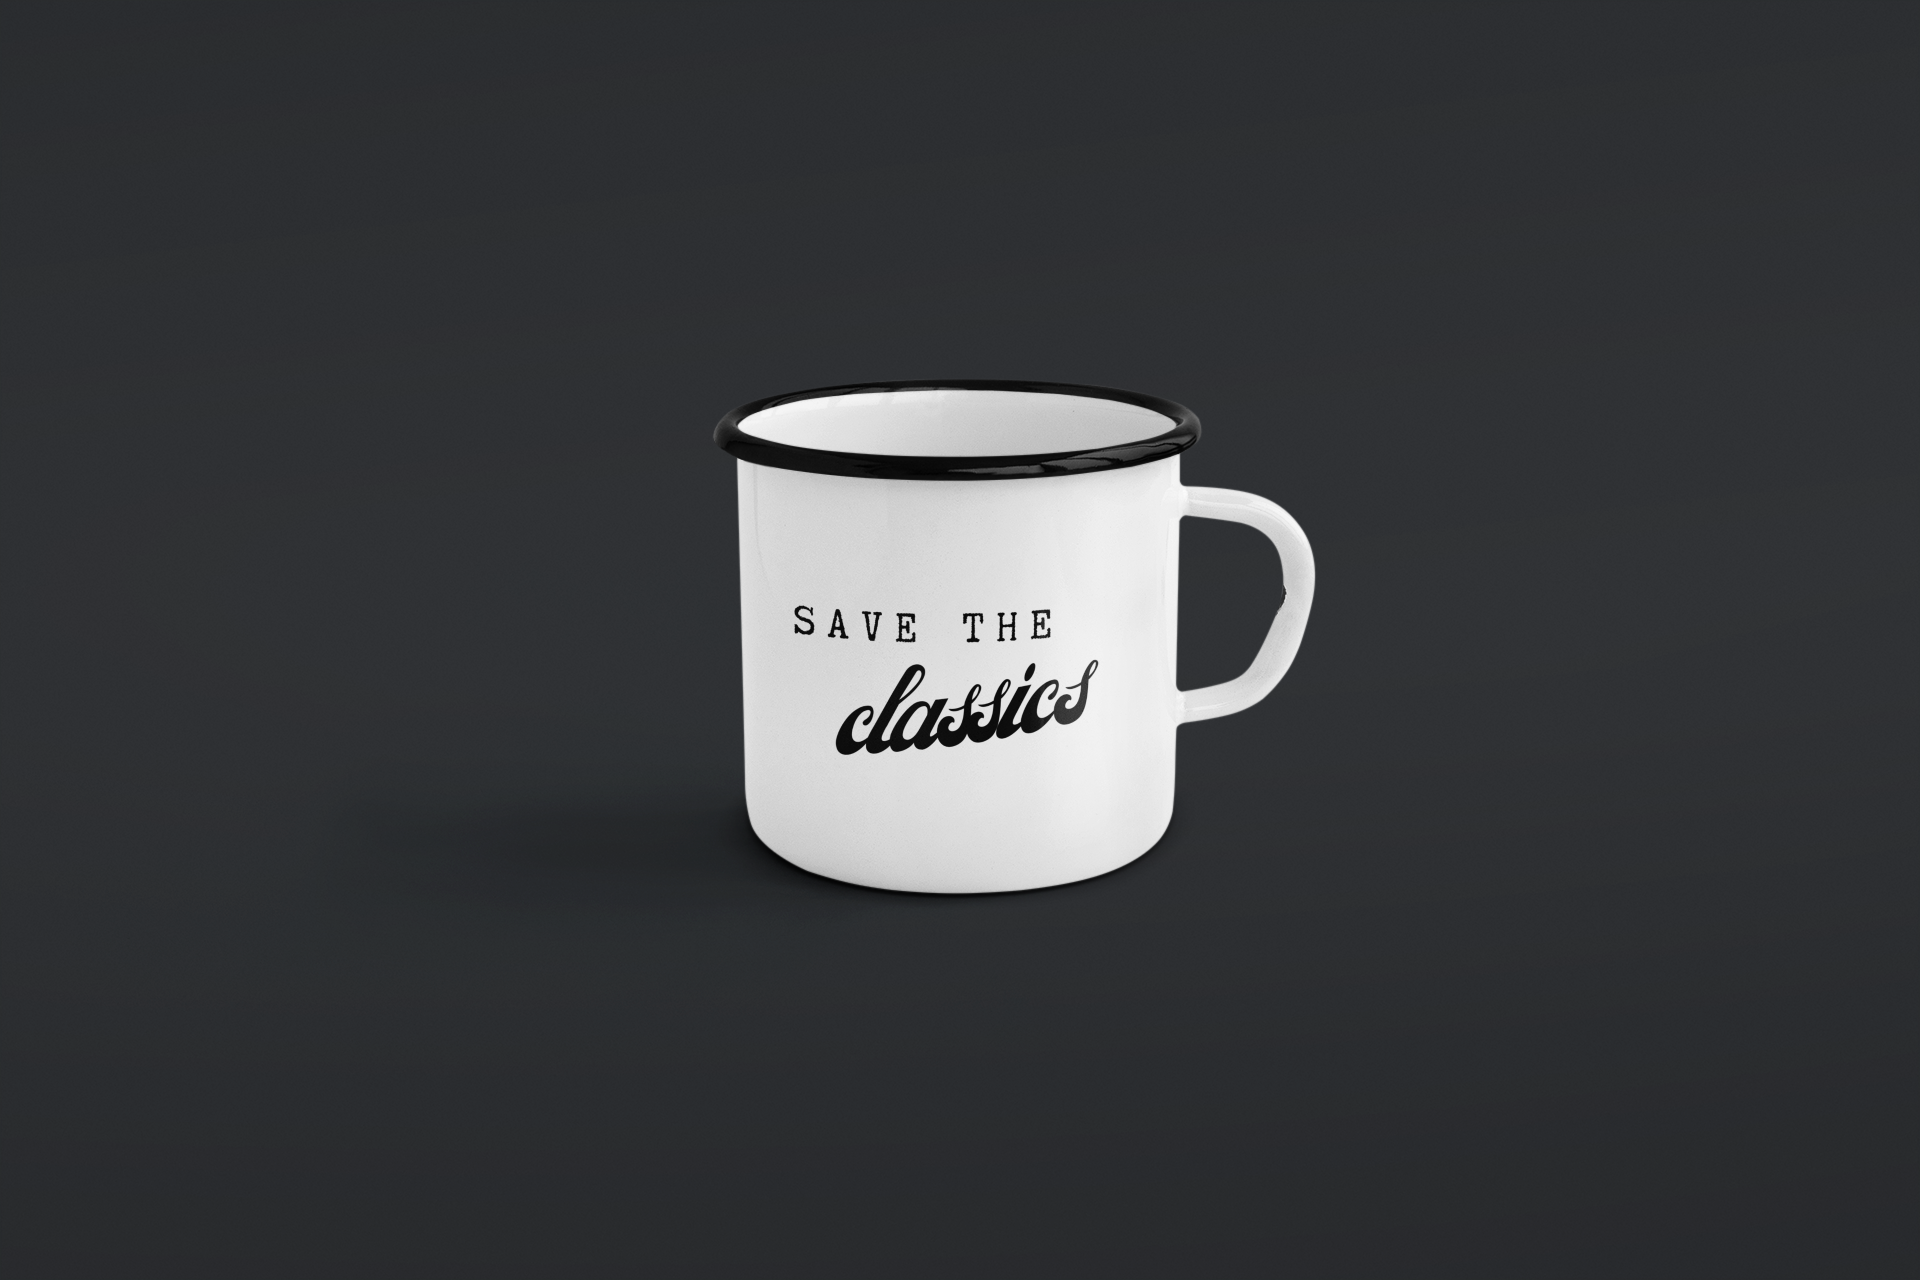  Emaille Tasse "Save the Classics" Version 1